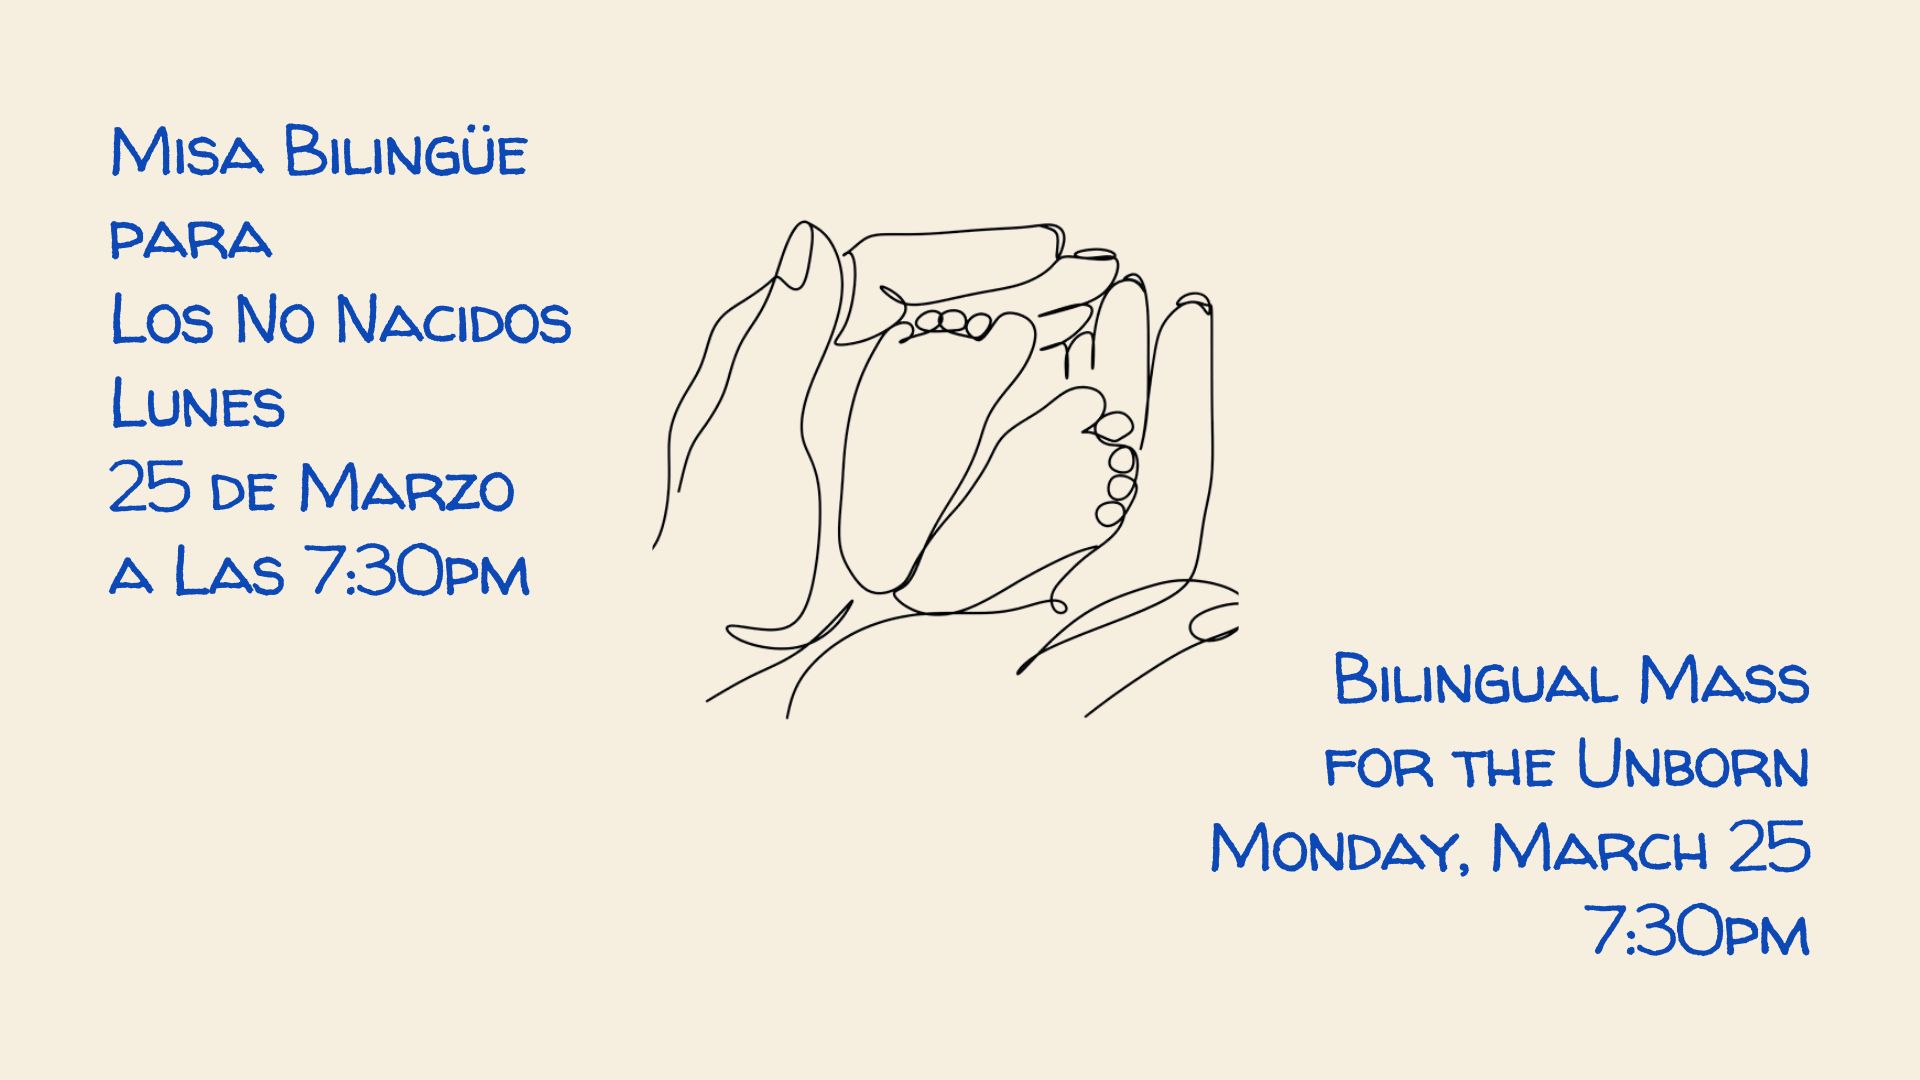 Bilingual Mass for the Unborn Monday, March 25, 730pm